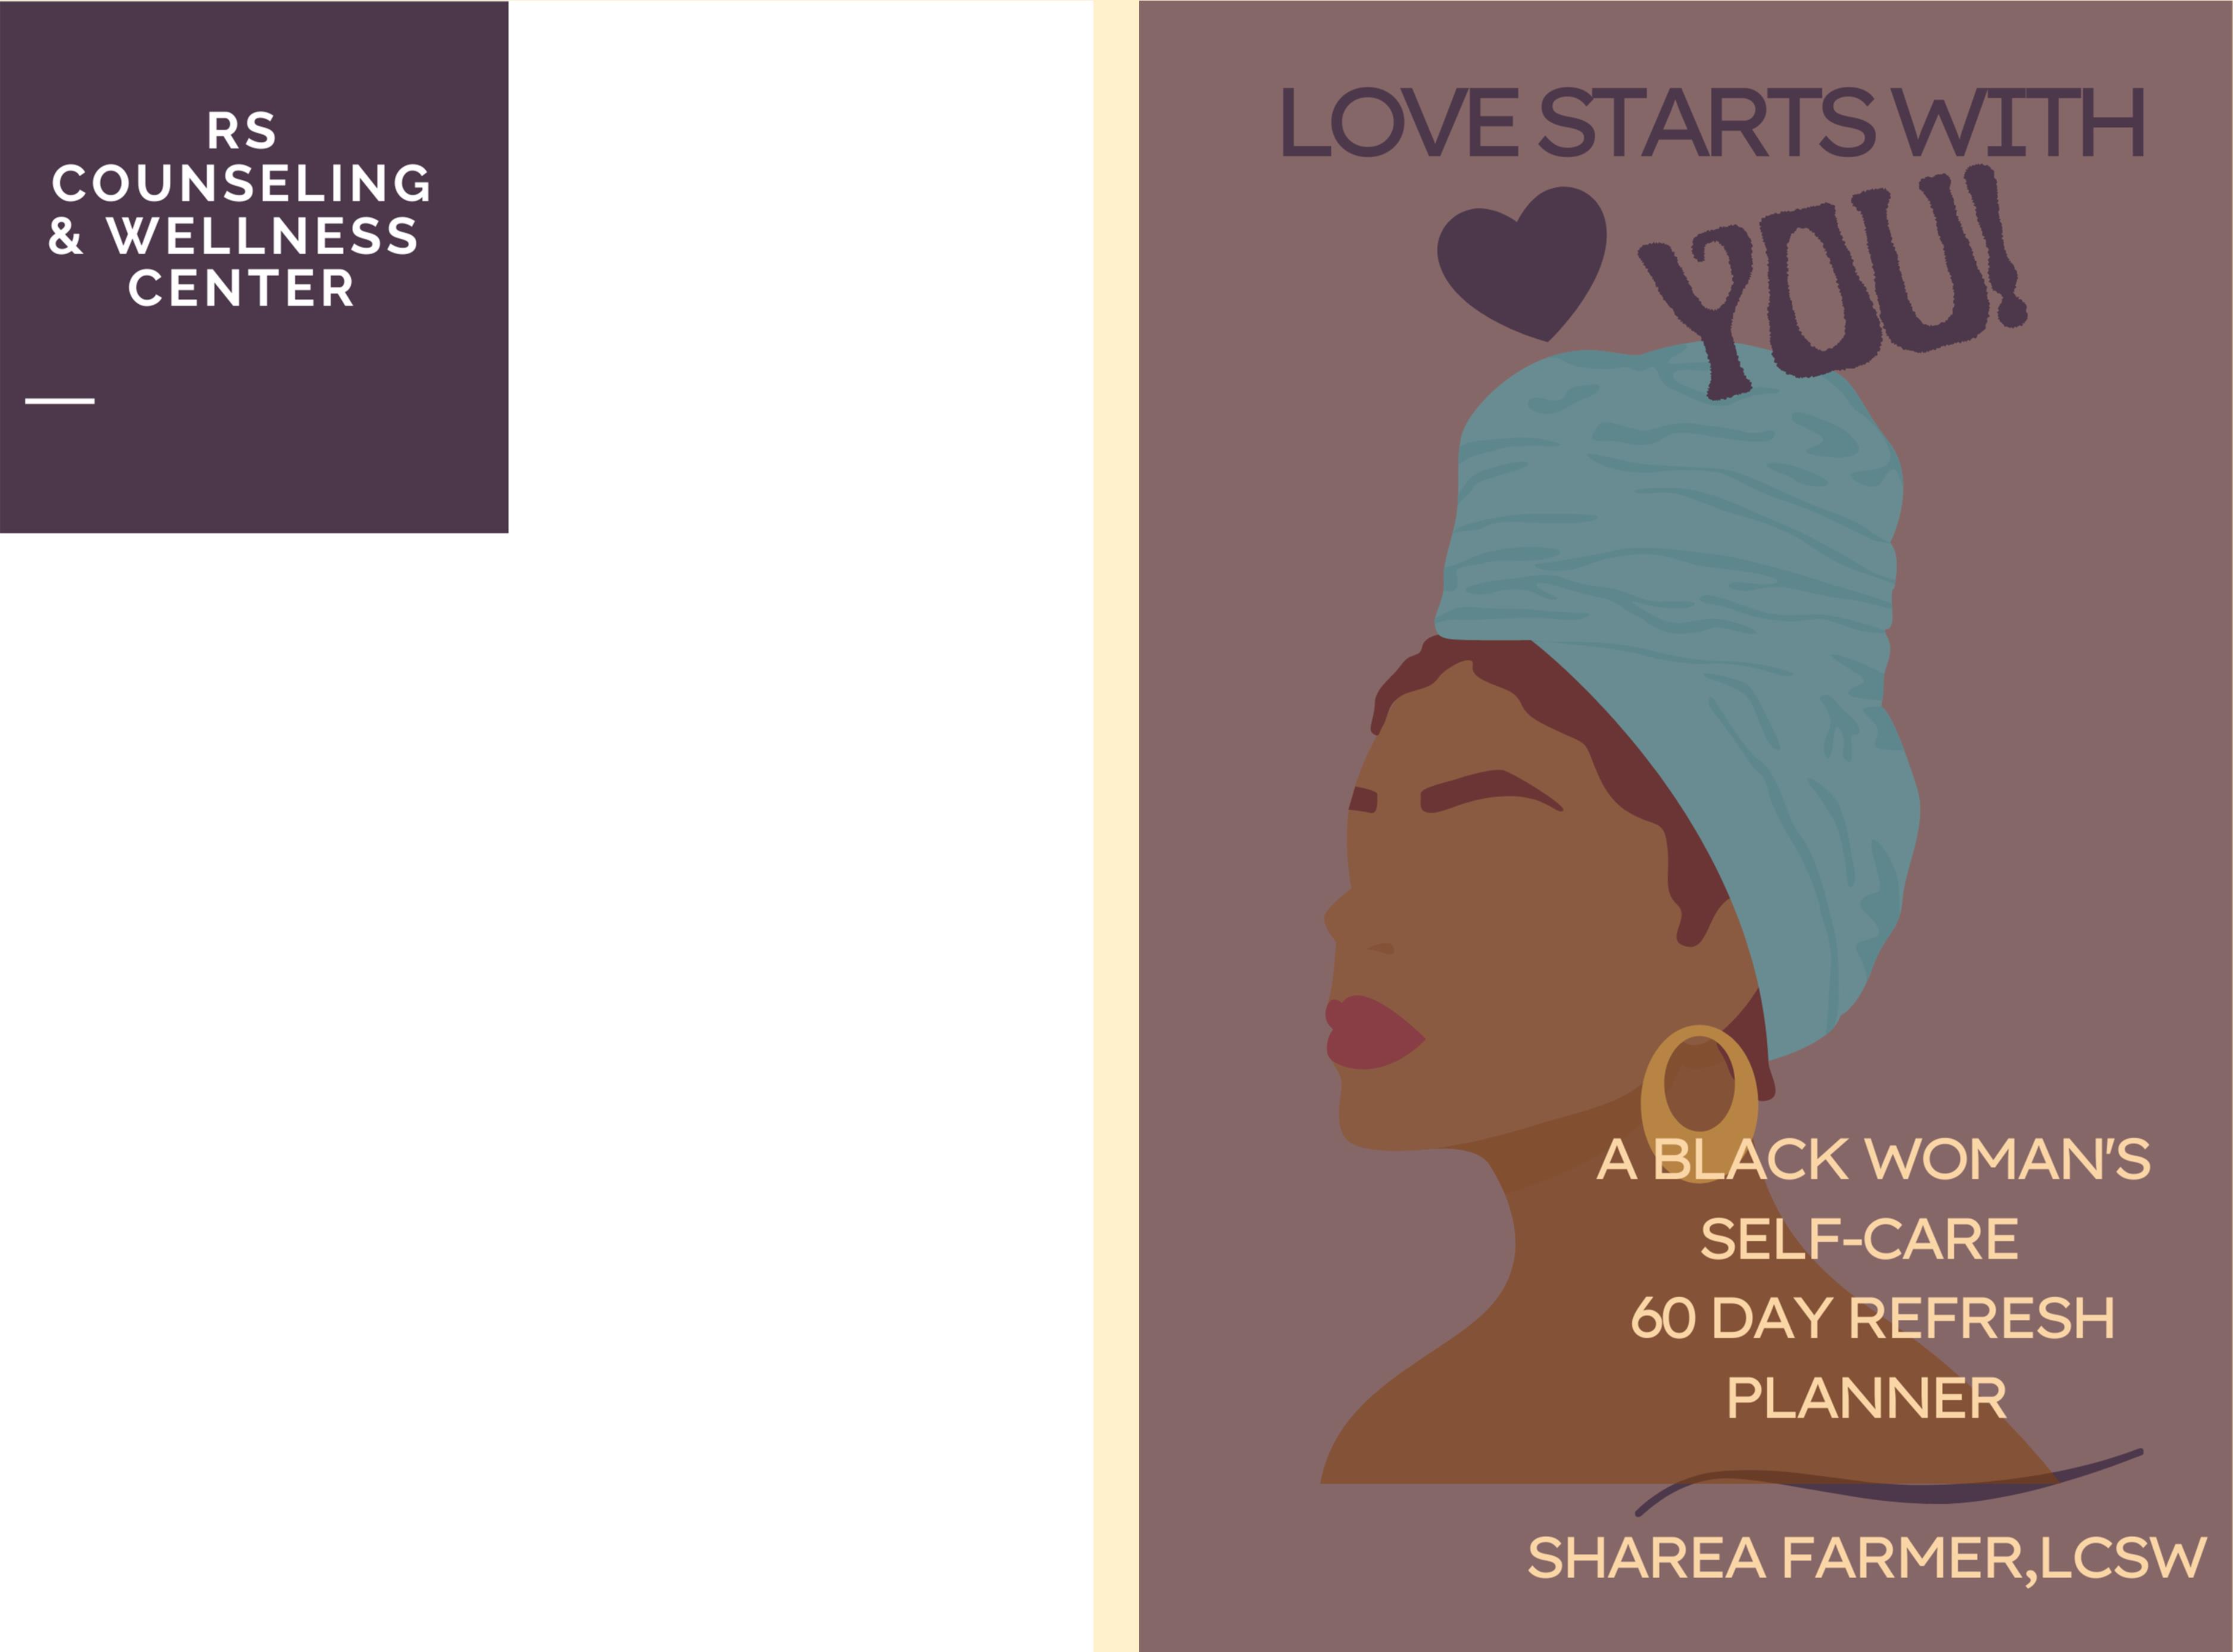 Love starts with you (2) cover image